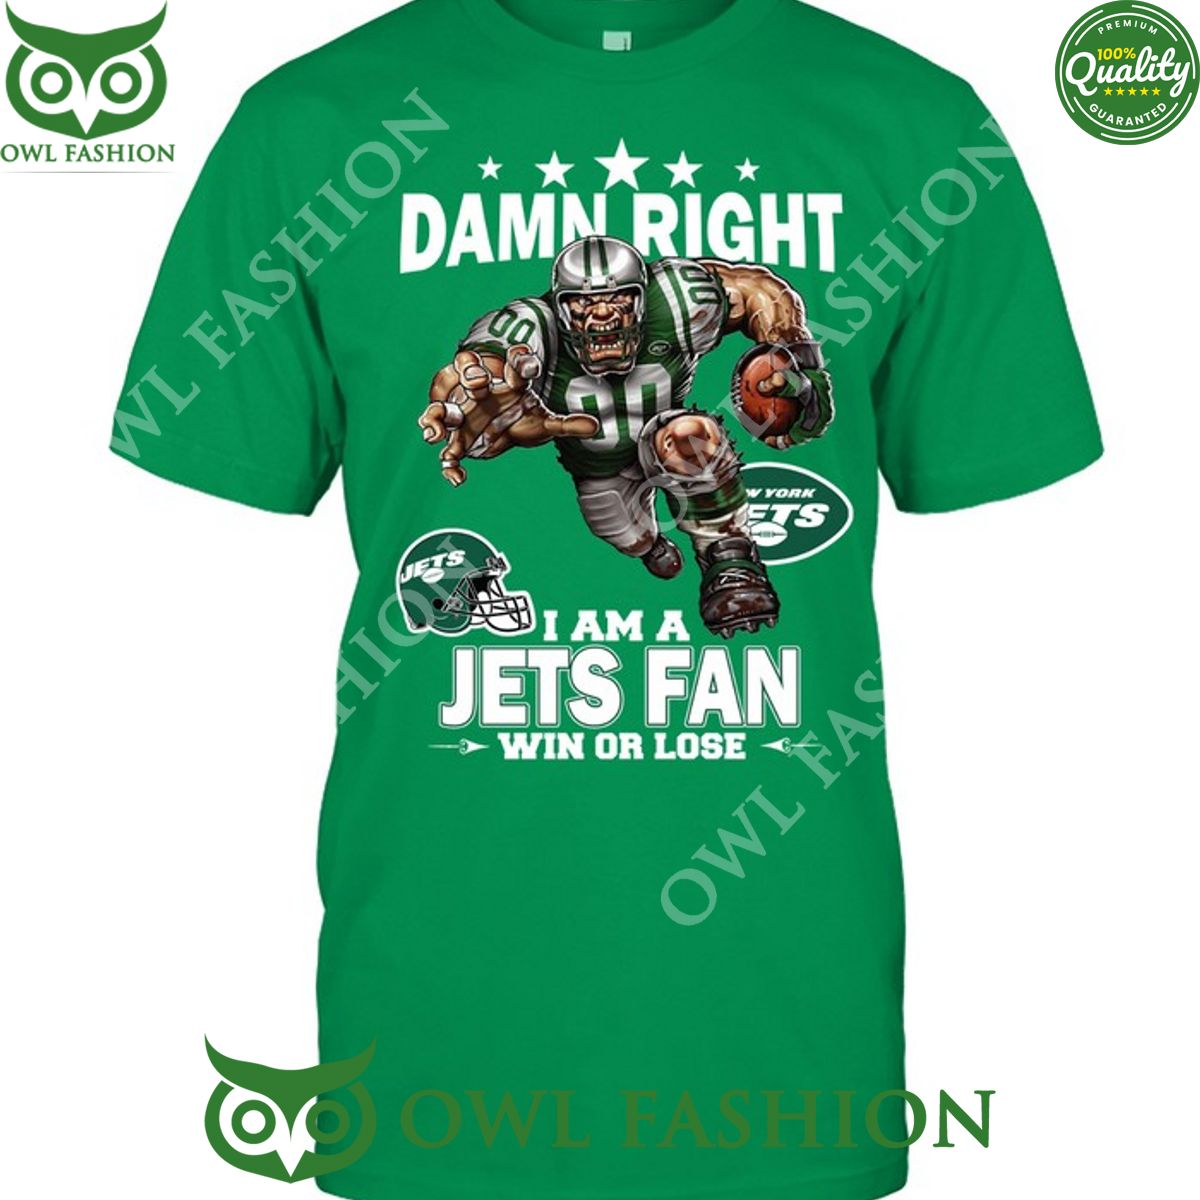 Damn Right New York Jets NFL Fan Win or lose t shirt Sizzling